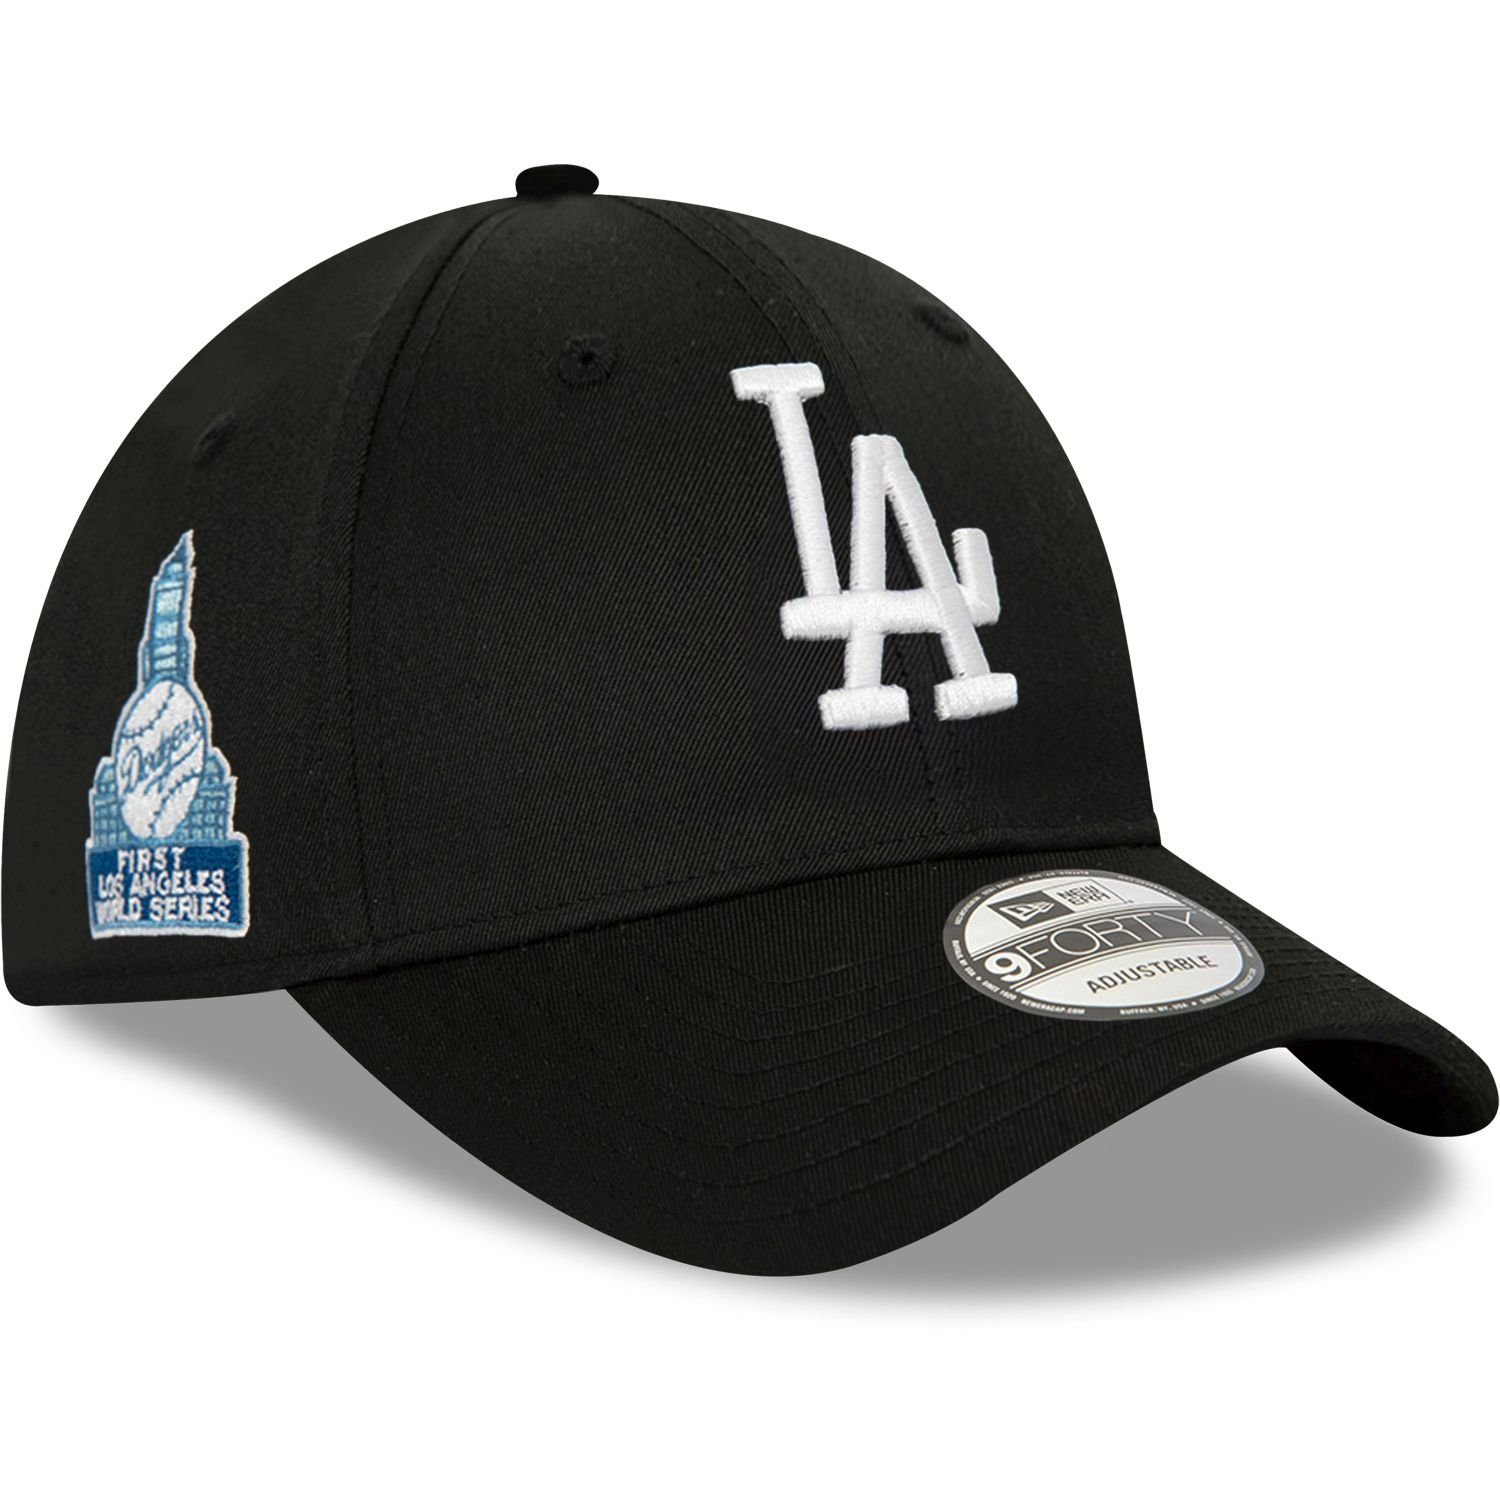 New Era Baseball Cap 9Forty SIDEPATCH Los Angeles Dodgers